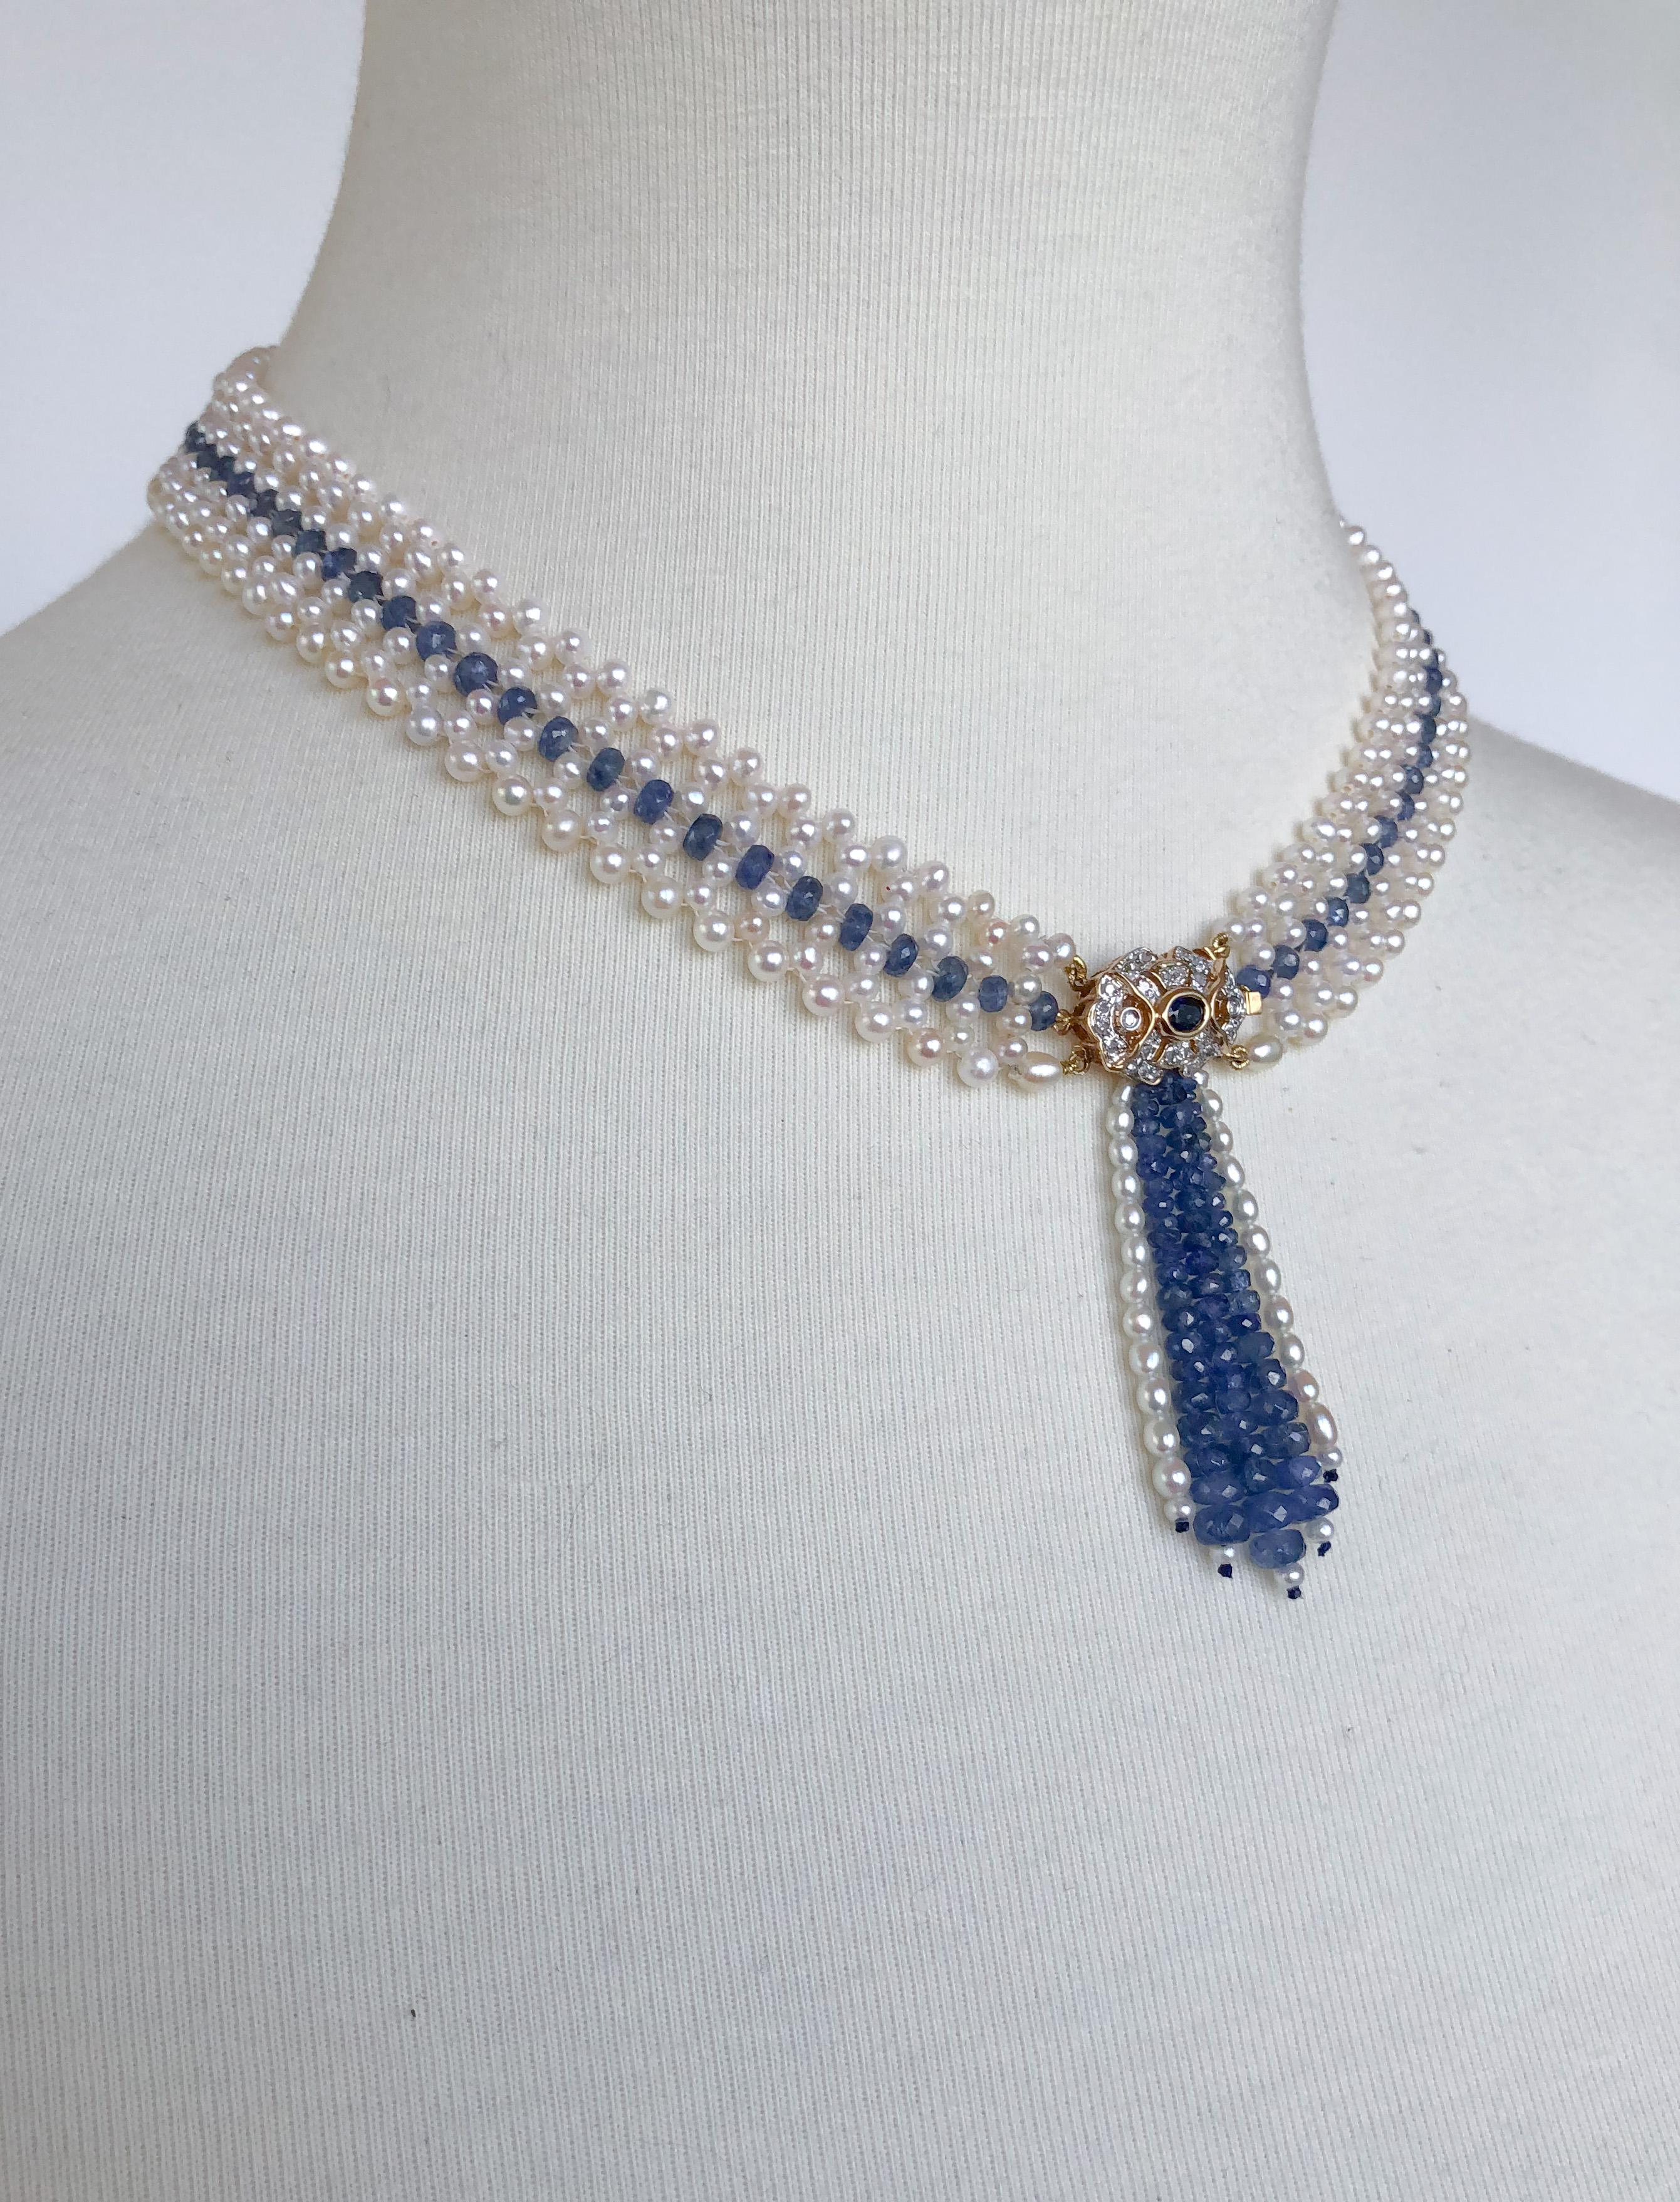 Classic piece hand woven by Marina J. This lovely necklace features all high luster white cultured Pearls all woven into a fine lace like design. A gorgeous 14k Yellow Gold Diamond encrusted Centerpiece sits in the middle of this necklace, with